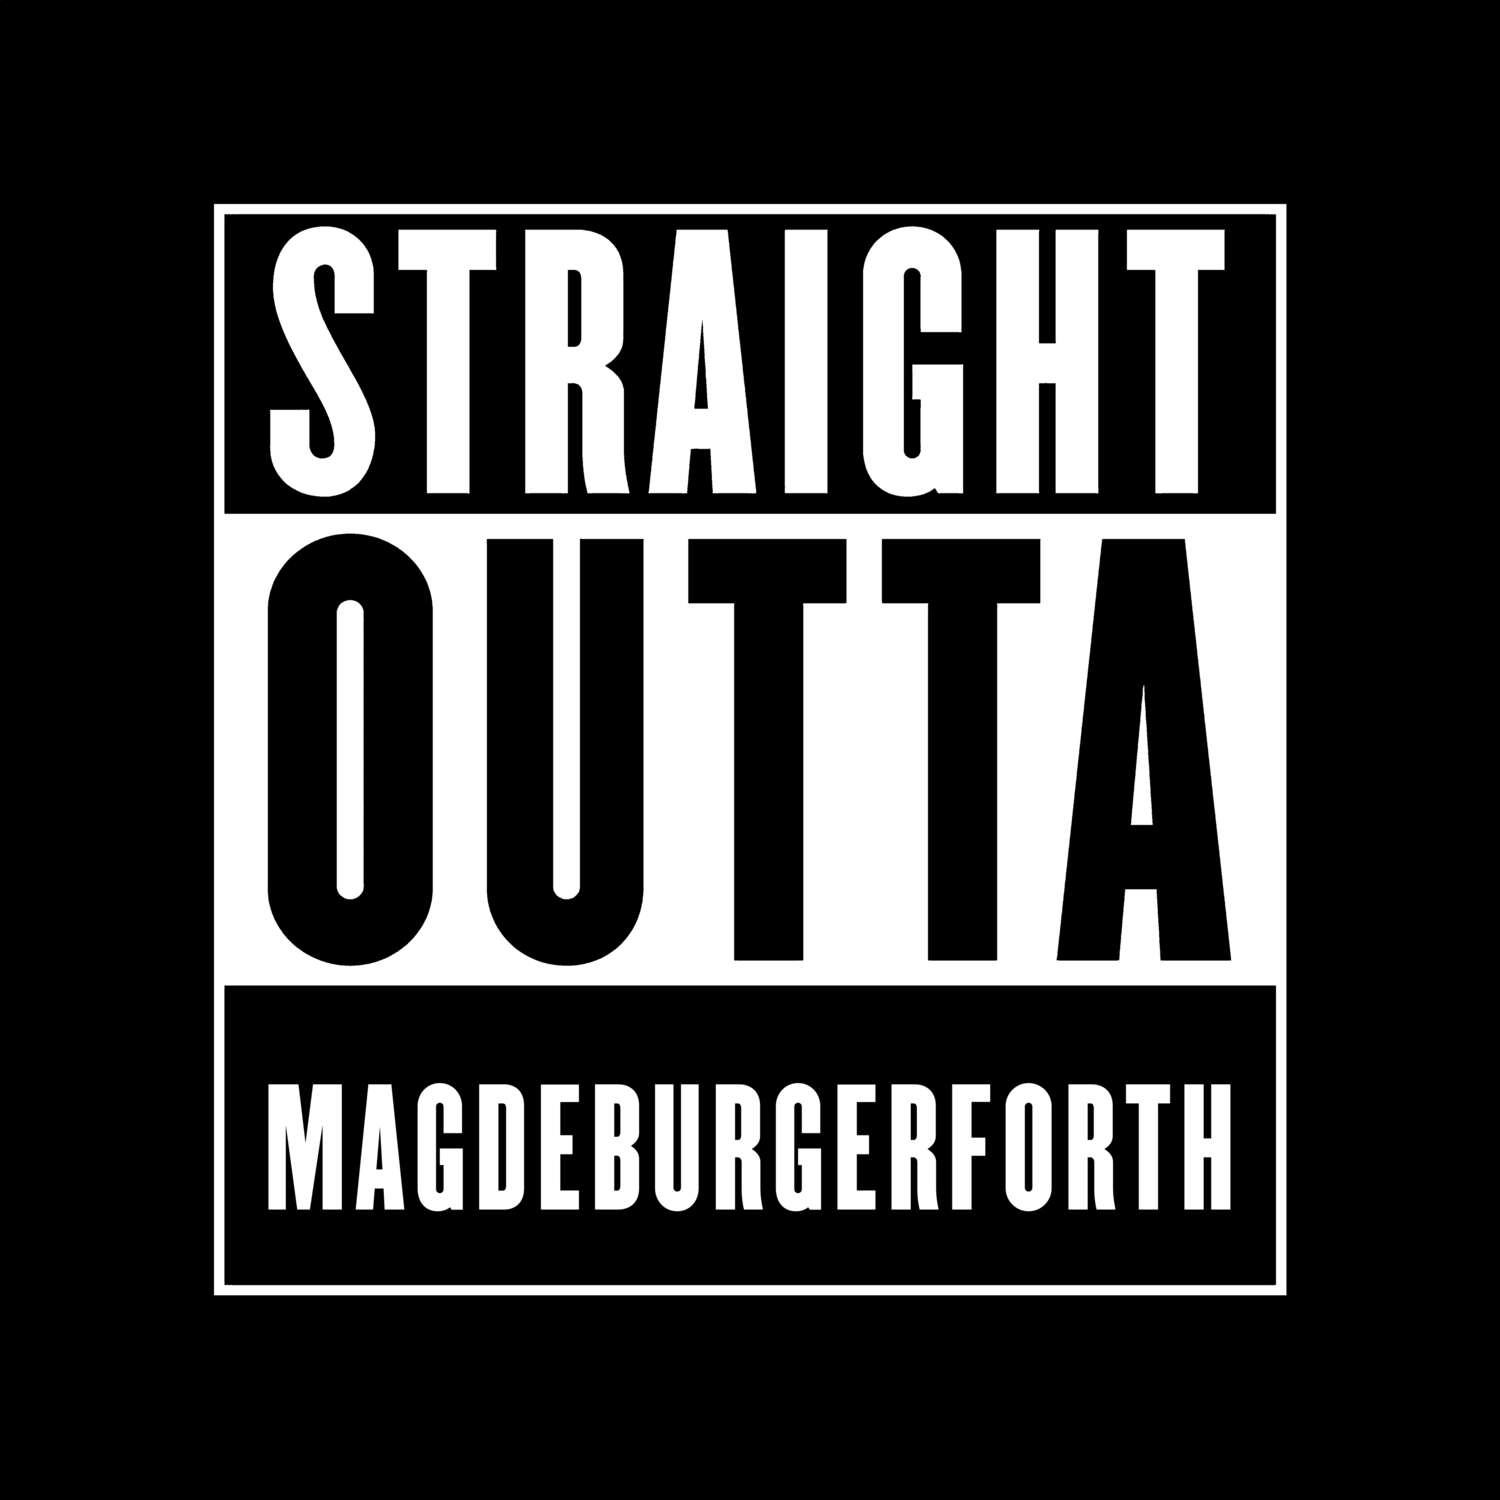 Magdeburgerforth T-Shirt »Straight Outta«